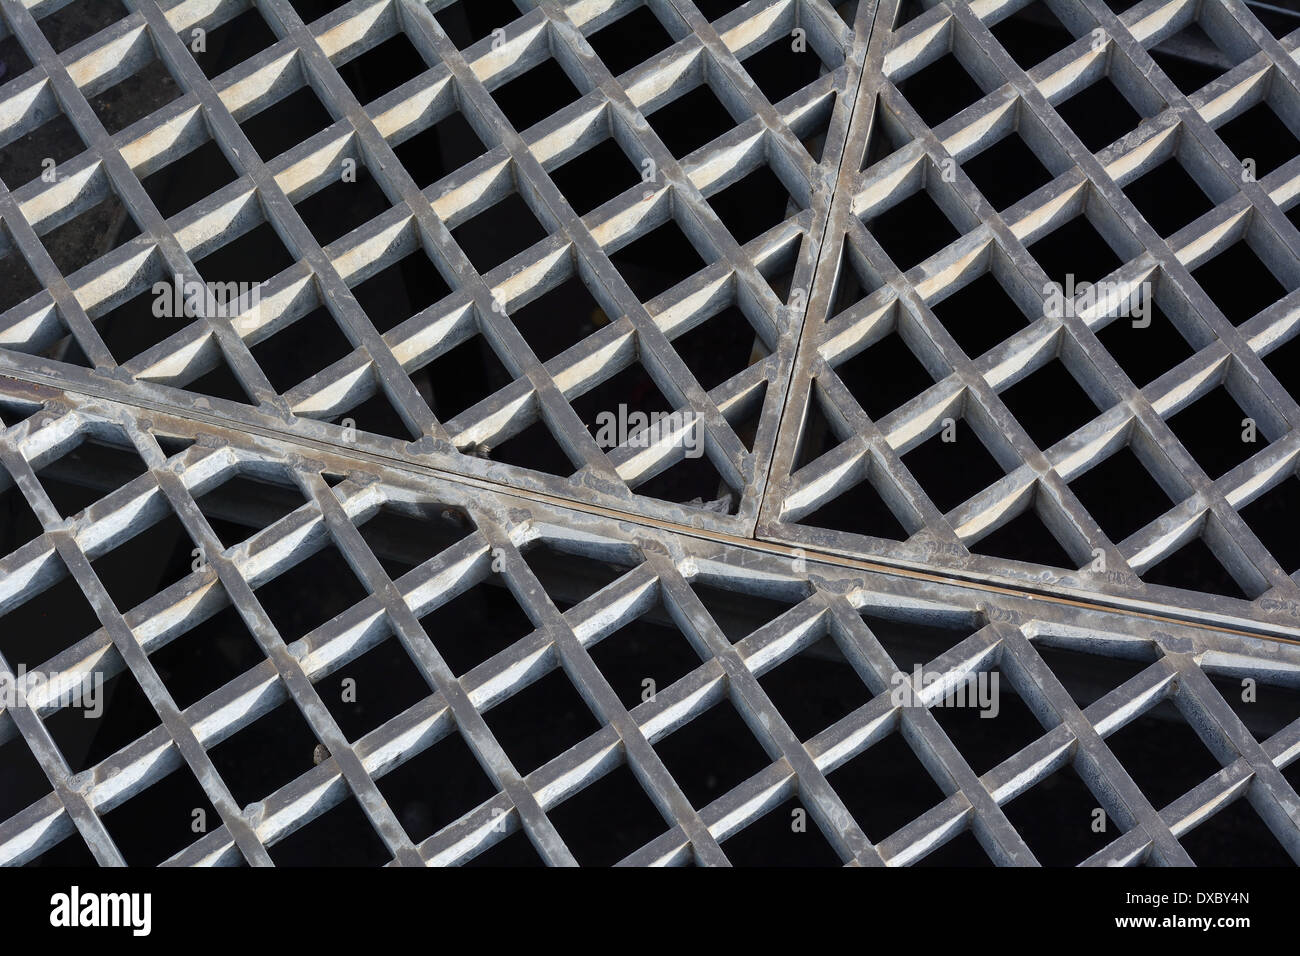 Metal Sewer Grate as Part of Urban Infrastructure Stock Photo